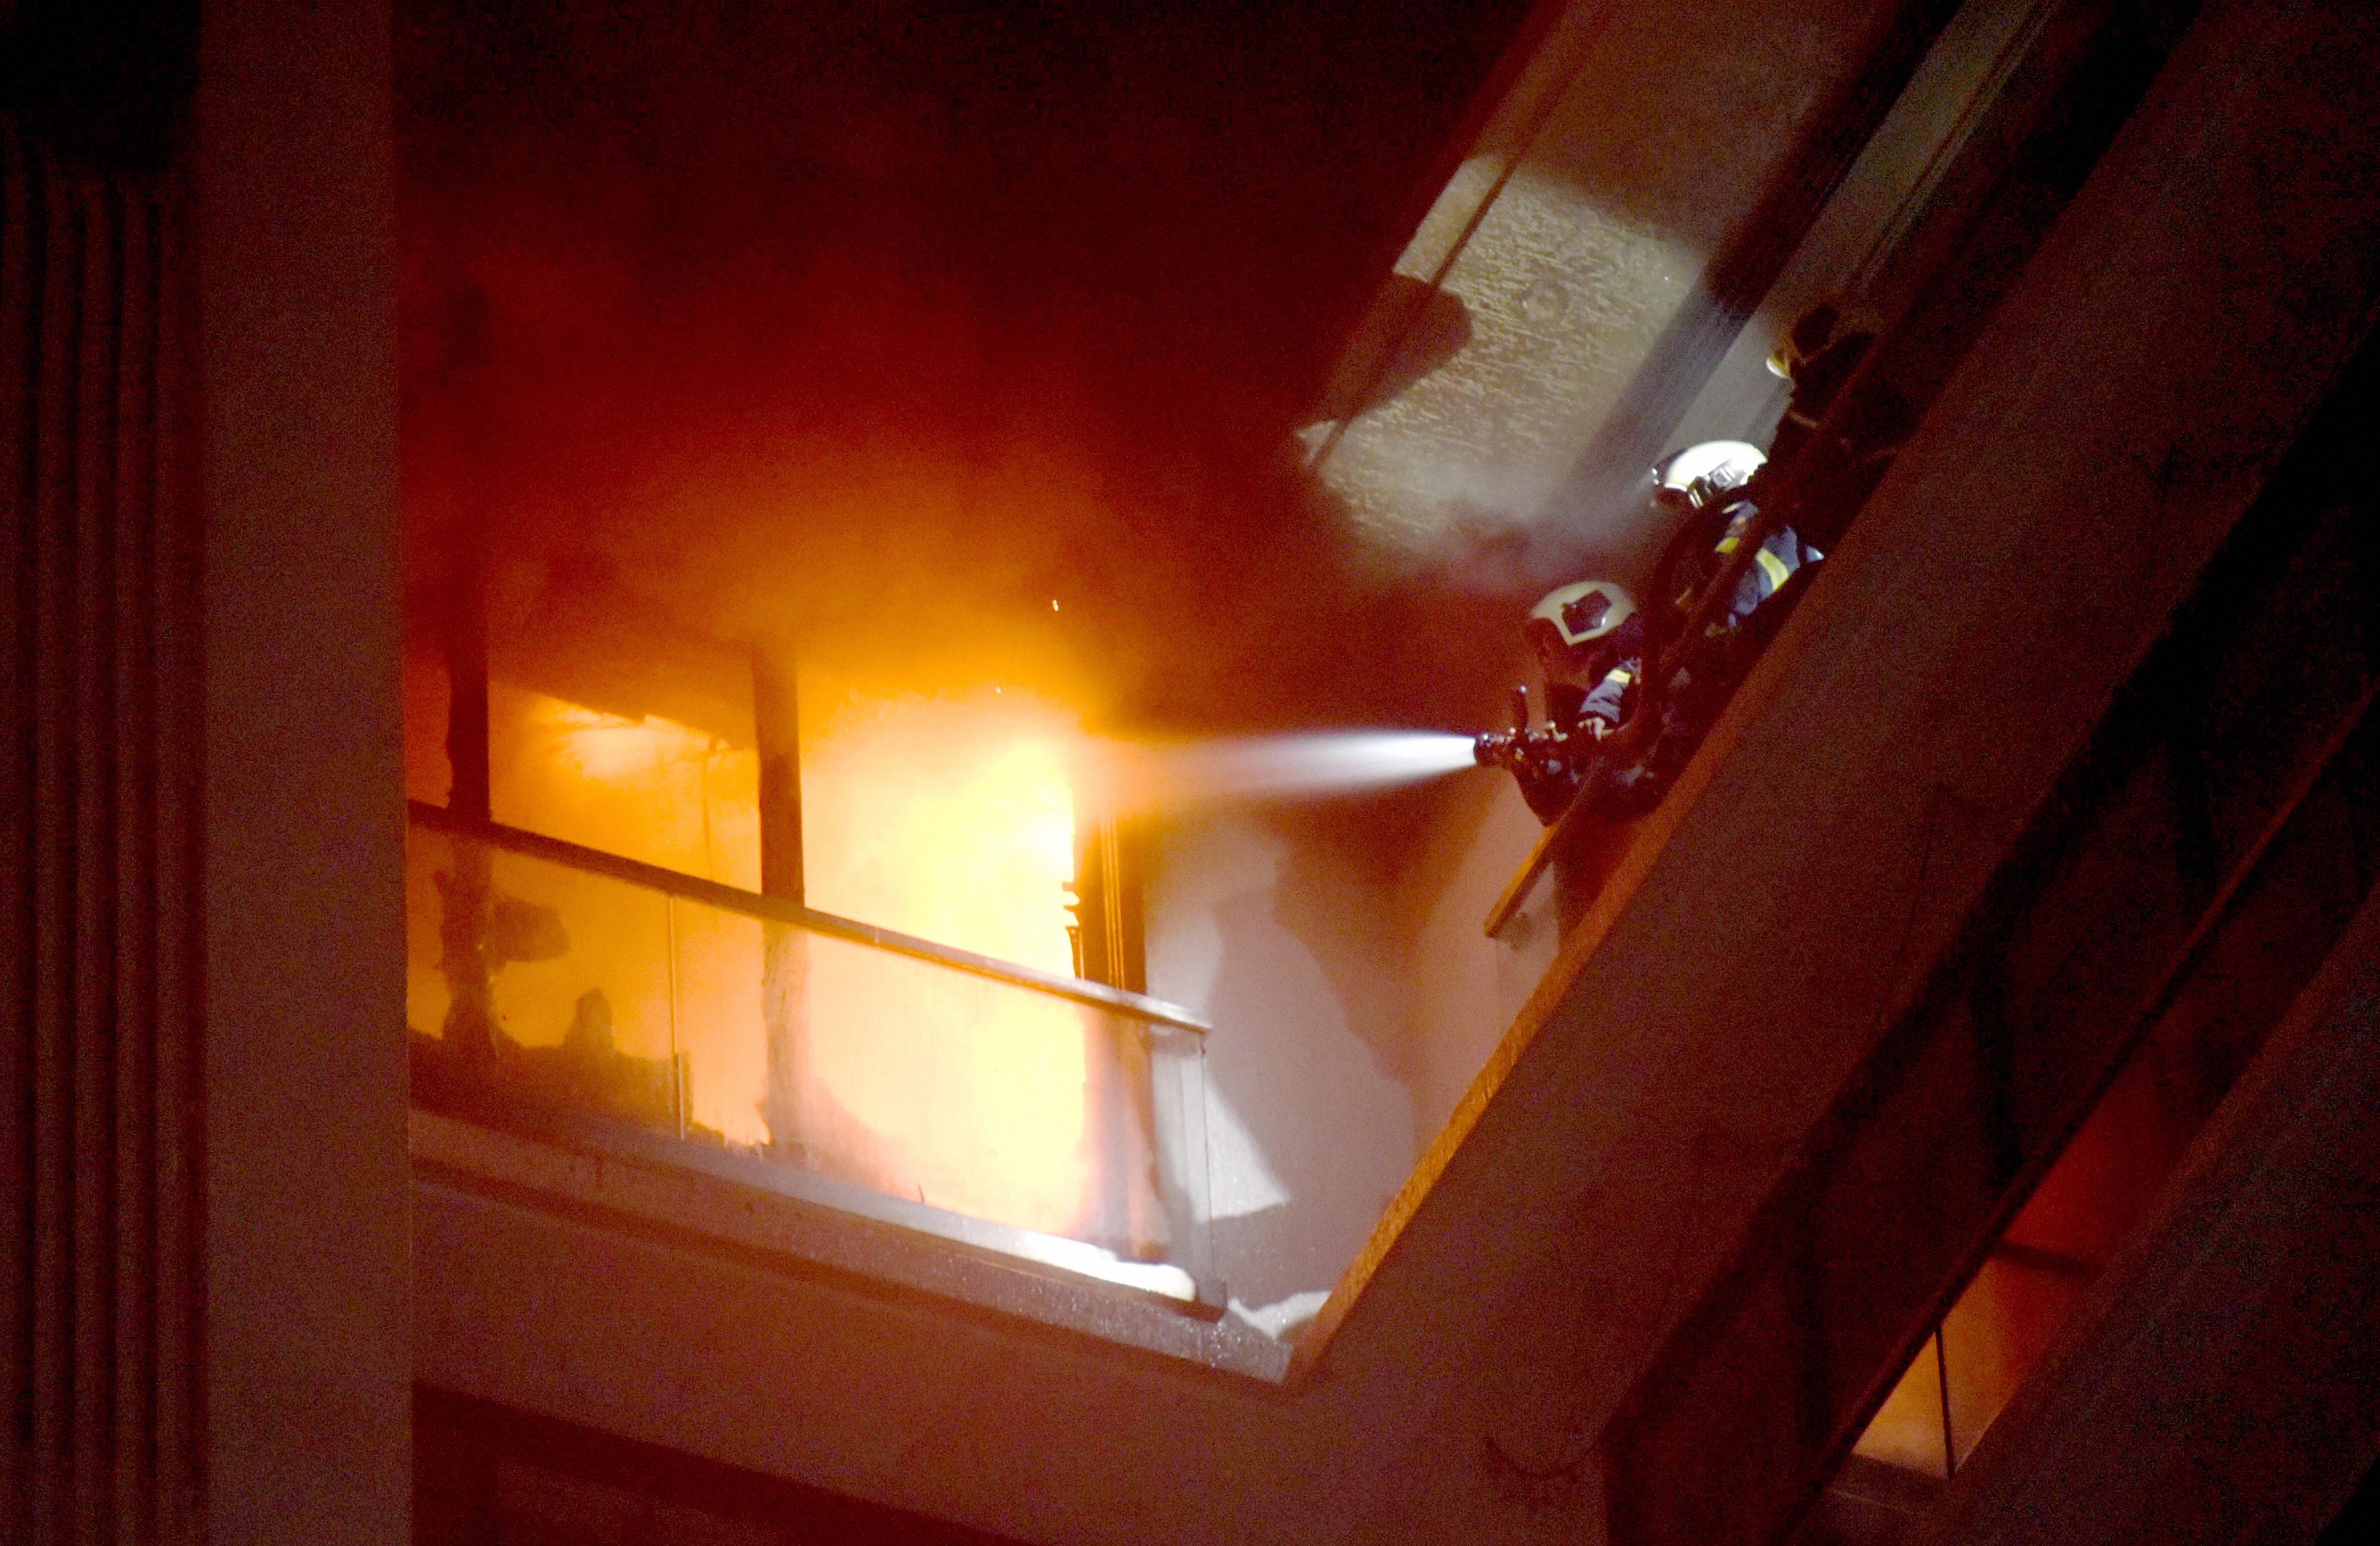 Mumbai residential building fire doused in 2 hours; 5 rescued